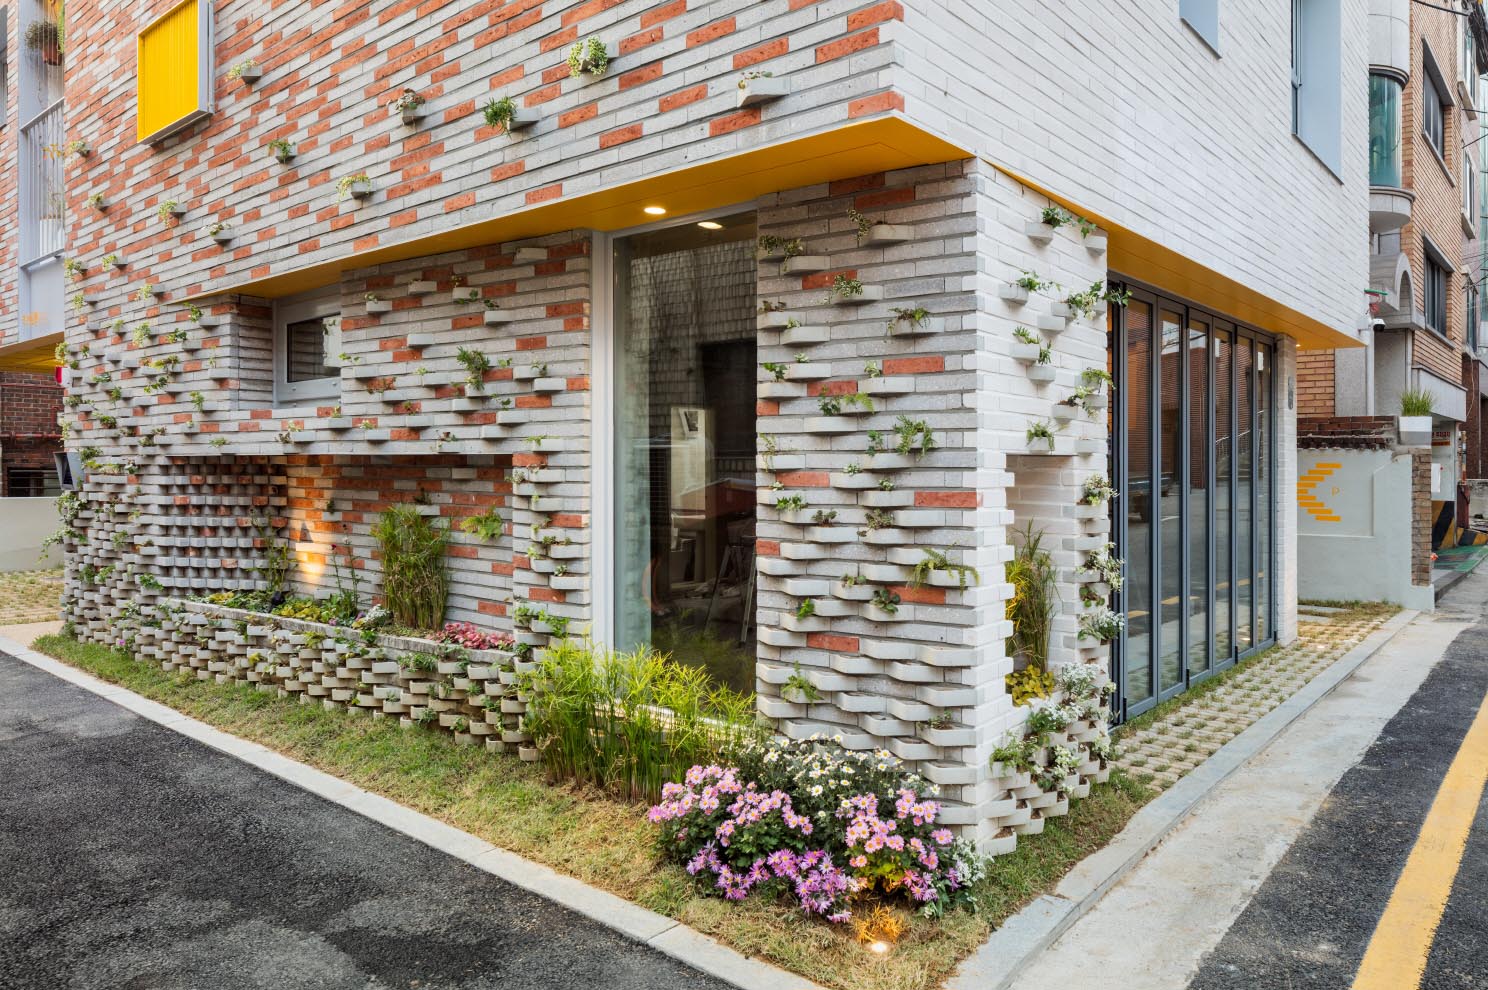 A modern brick building with incorporated plants into the facade.